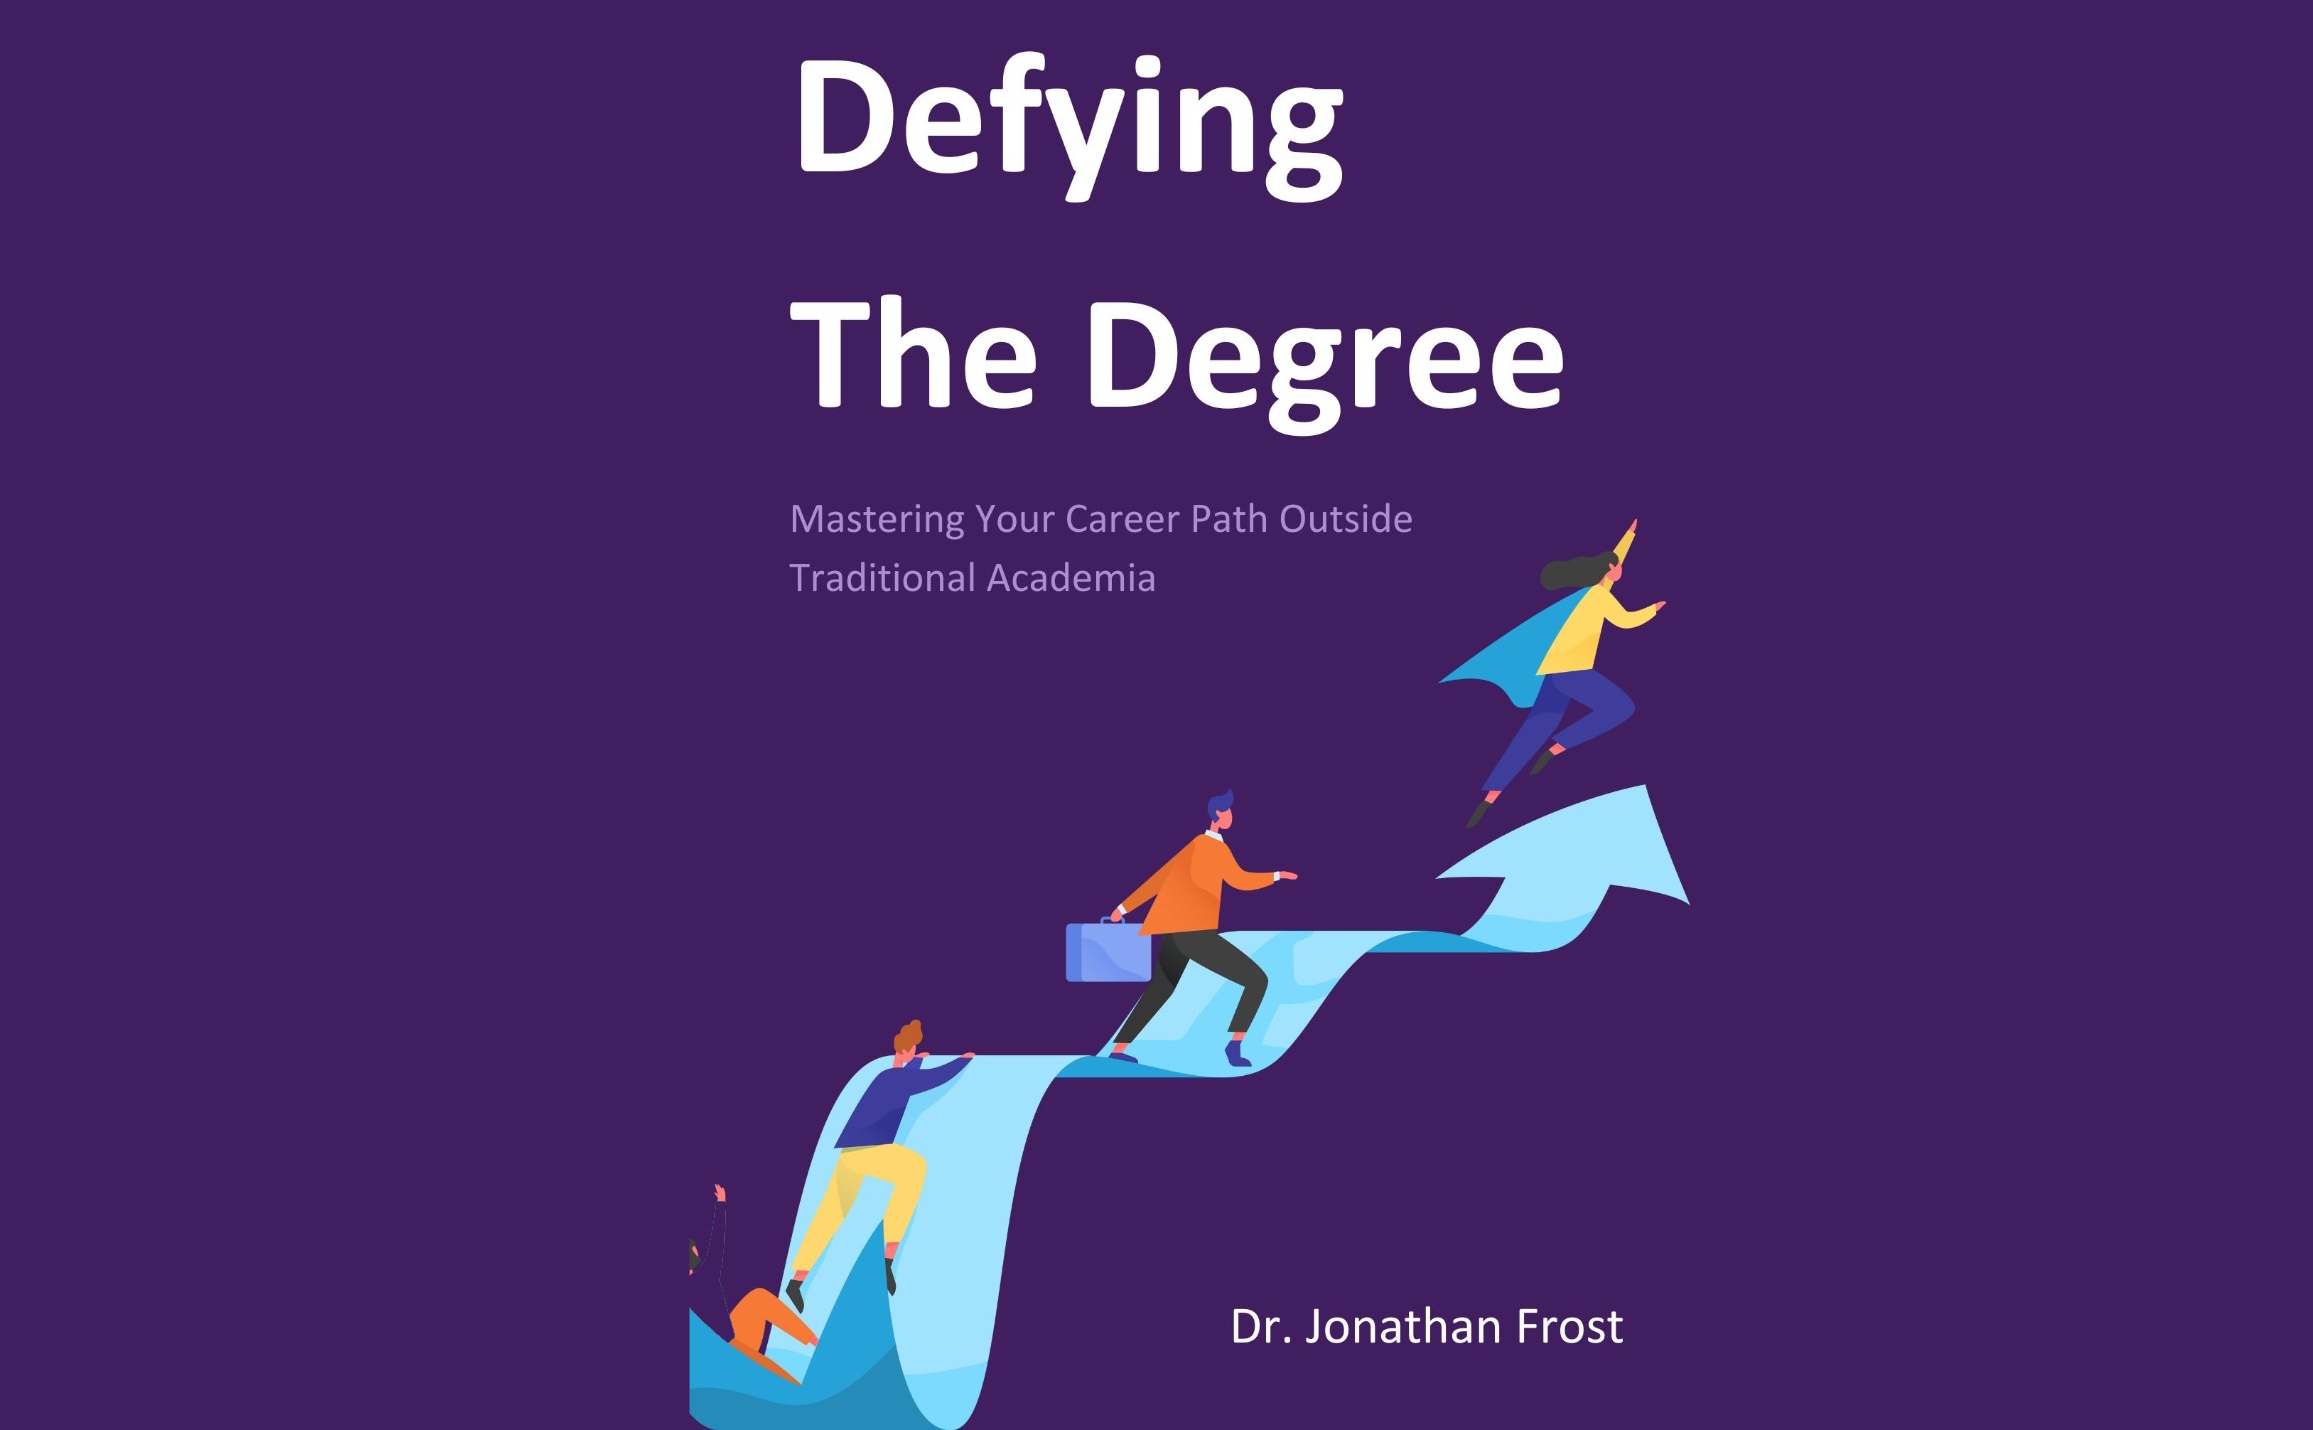 Book: Defying the Degree: Mastering Your Career Path Outside Traditional Academia. 